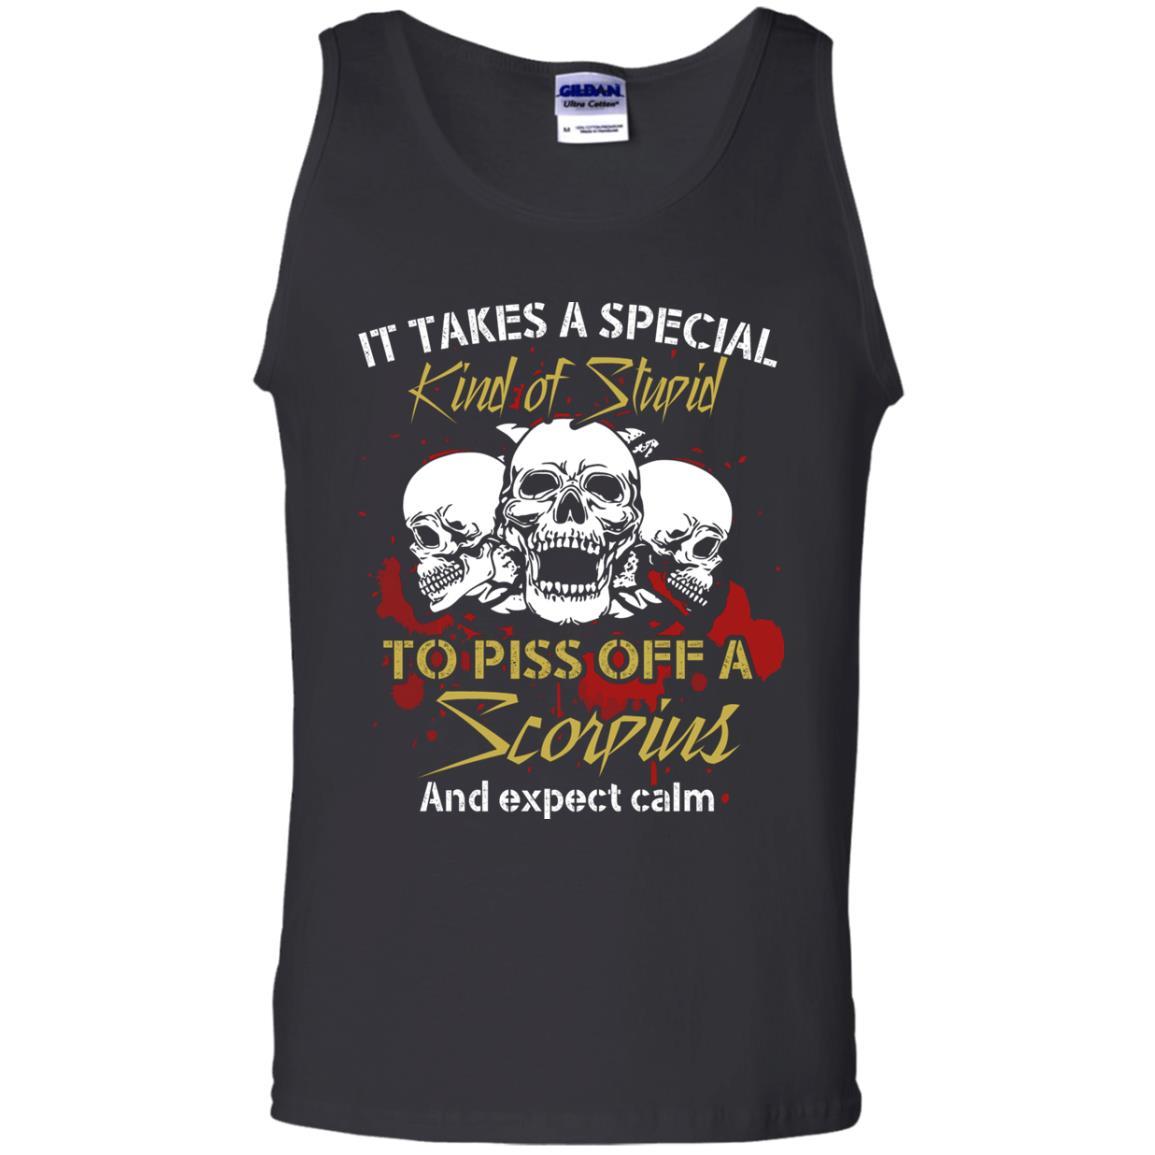 Brithday T-shirt It Take A Special Kind Of Stupid To Piss Off A Scorpius And Expect Calm